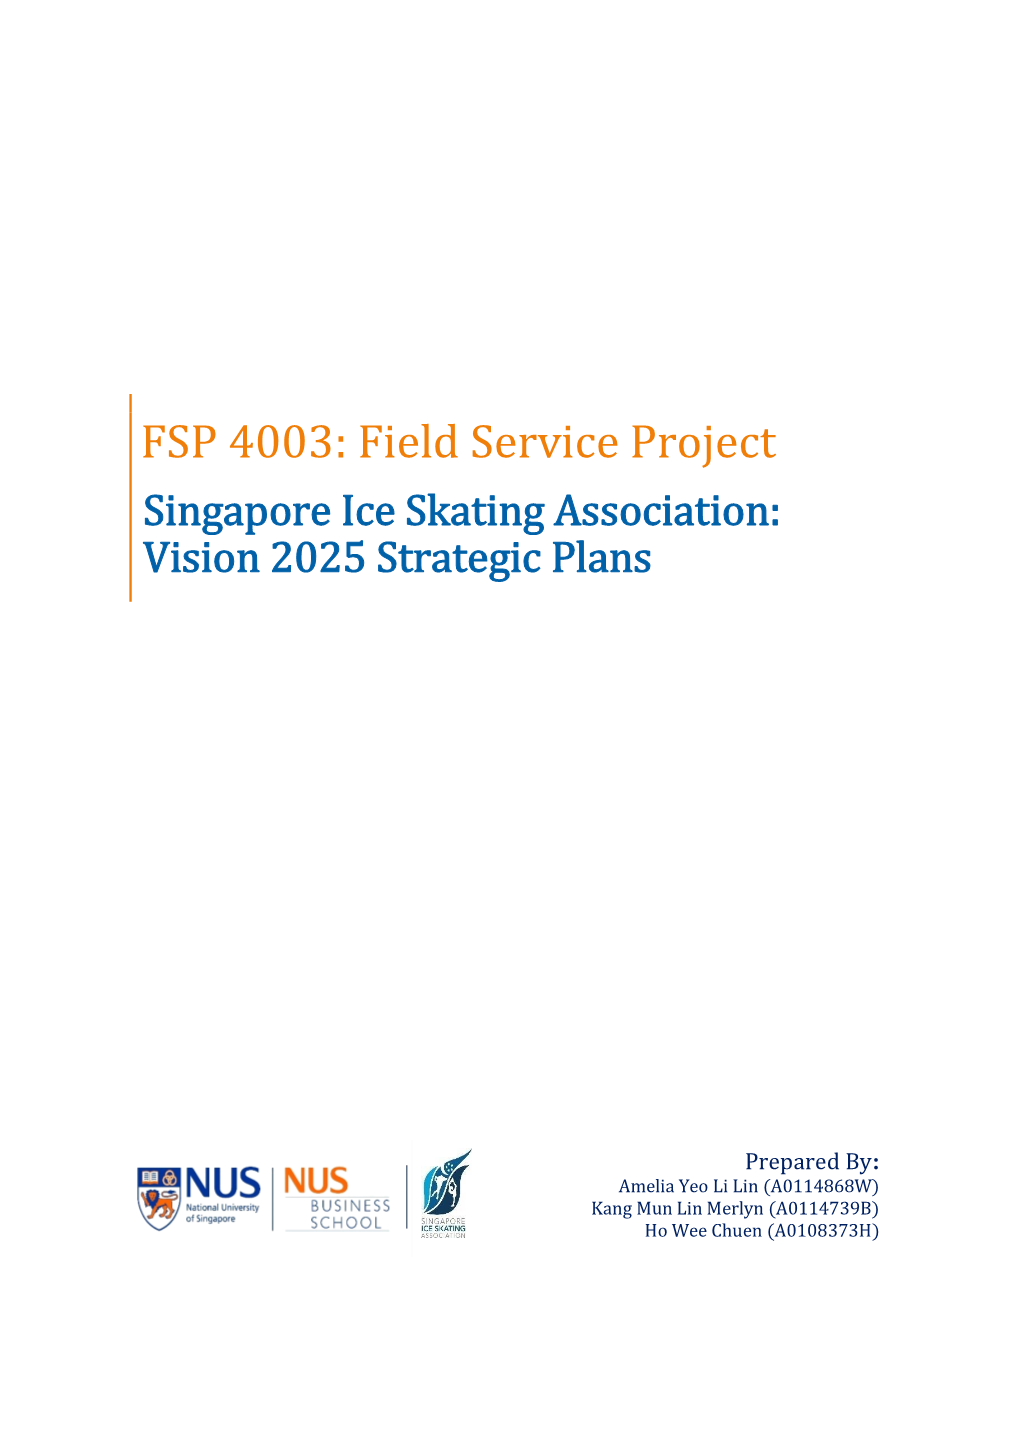 FSP 4003: Field Service Project Singapore Ice Skating Association: Vision 2025 Strategic Plans